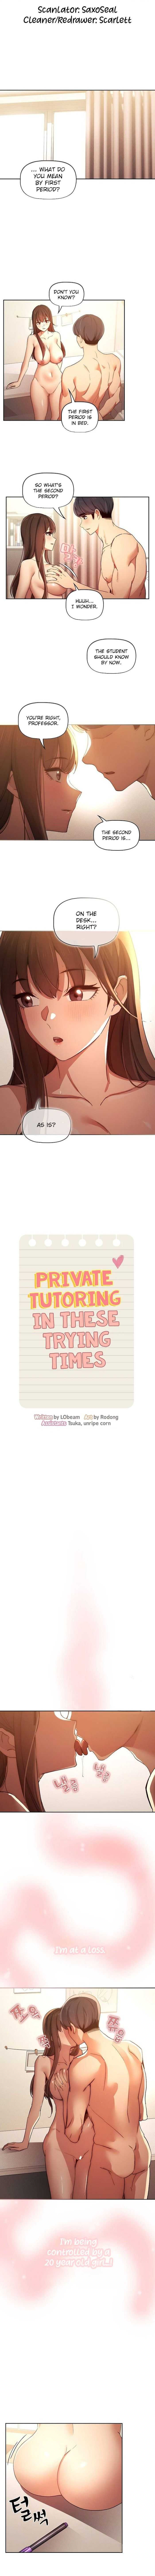 Private Tutoring In These Trying Times - Page 1